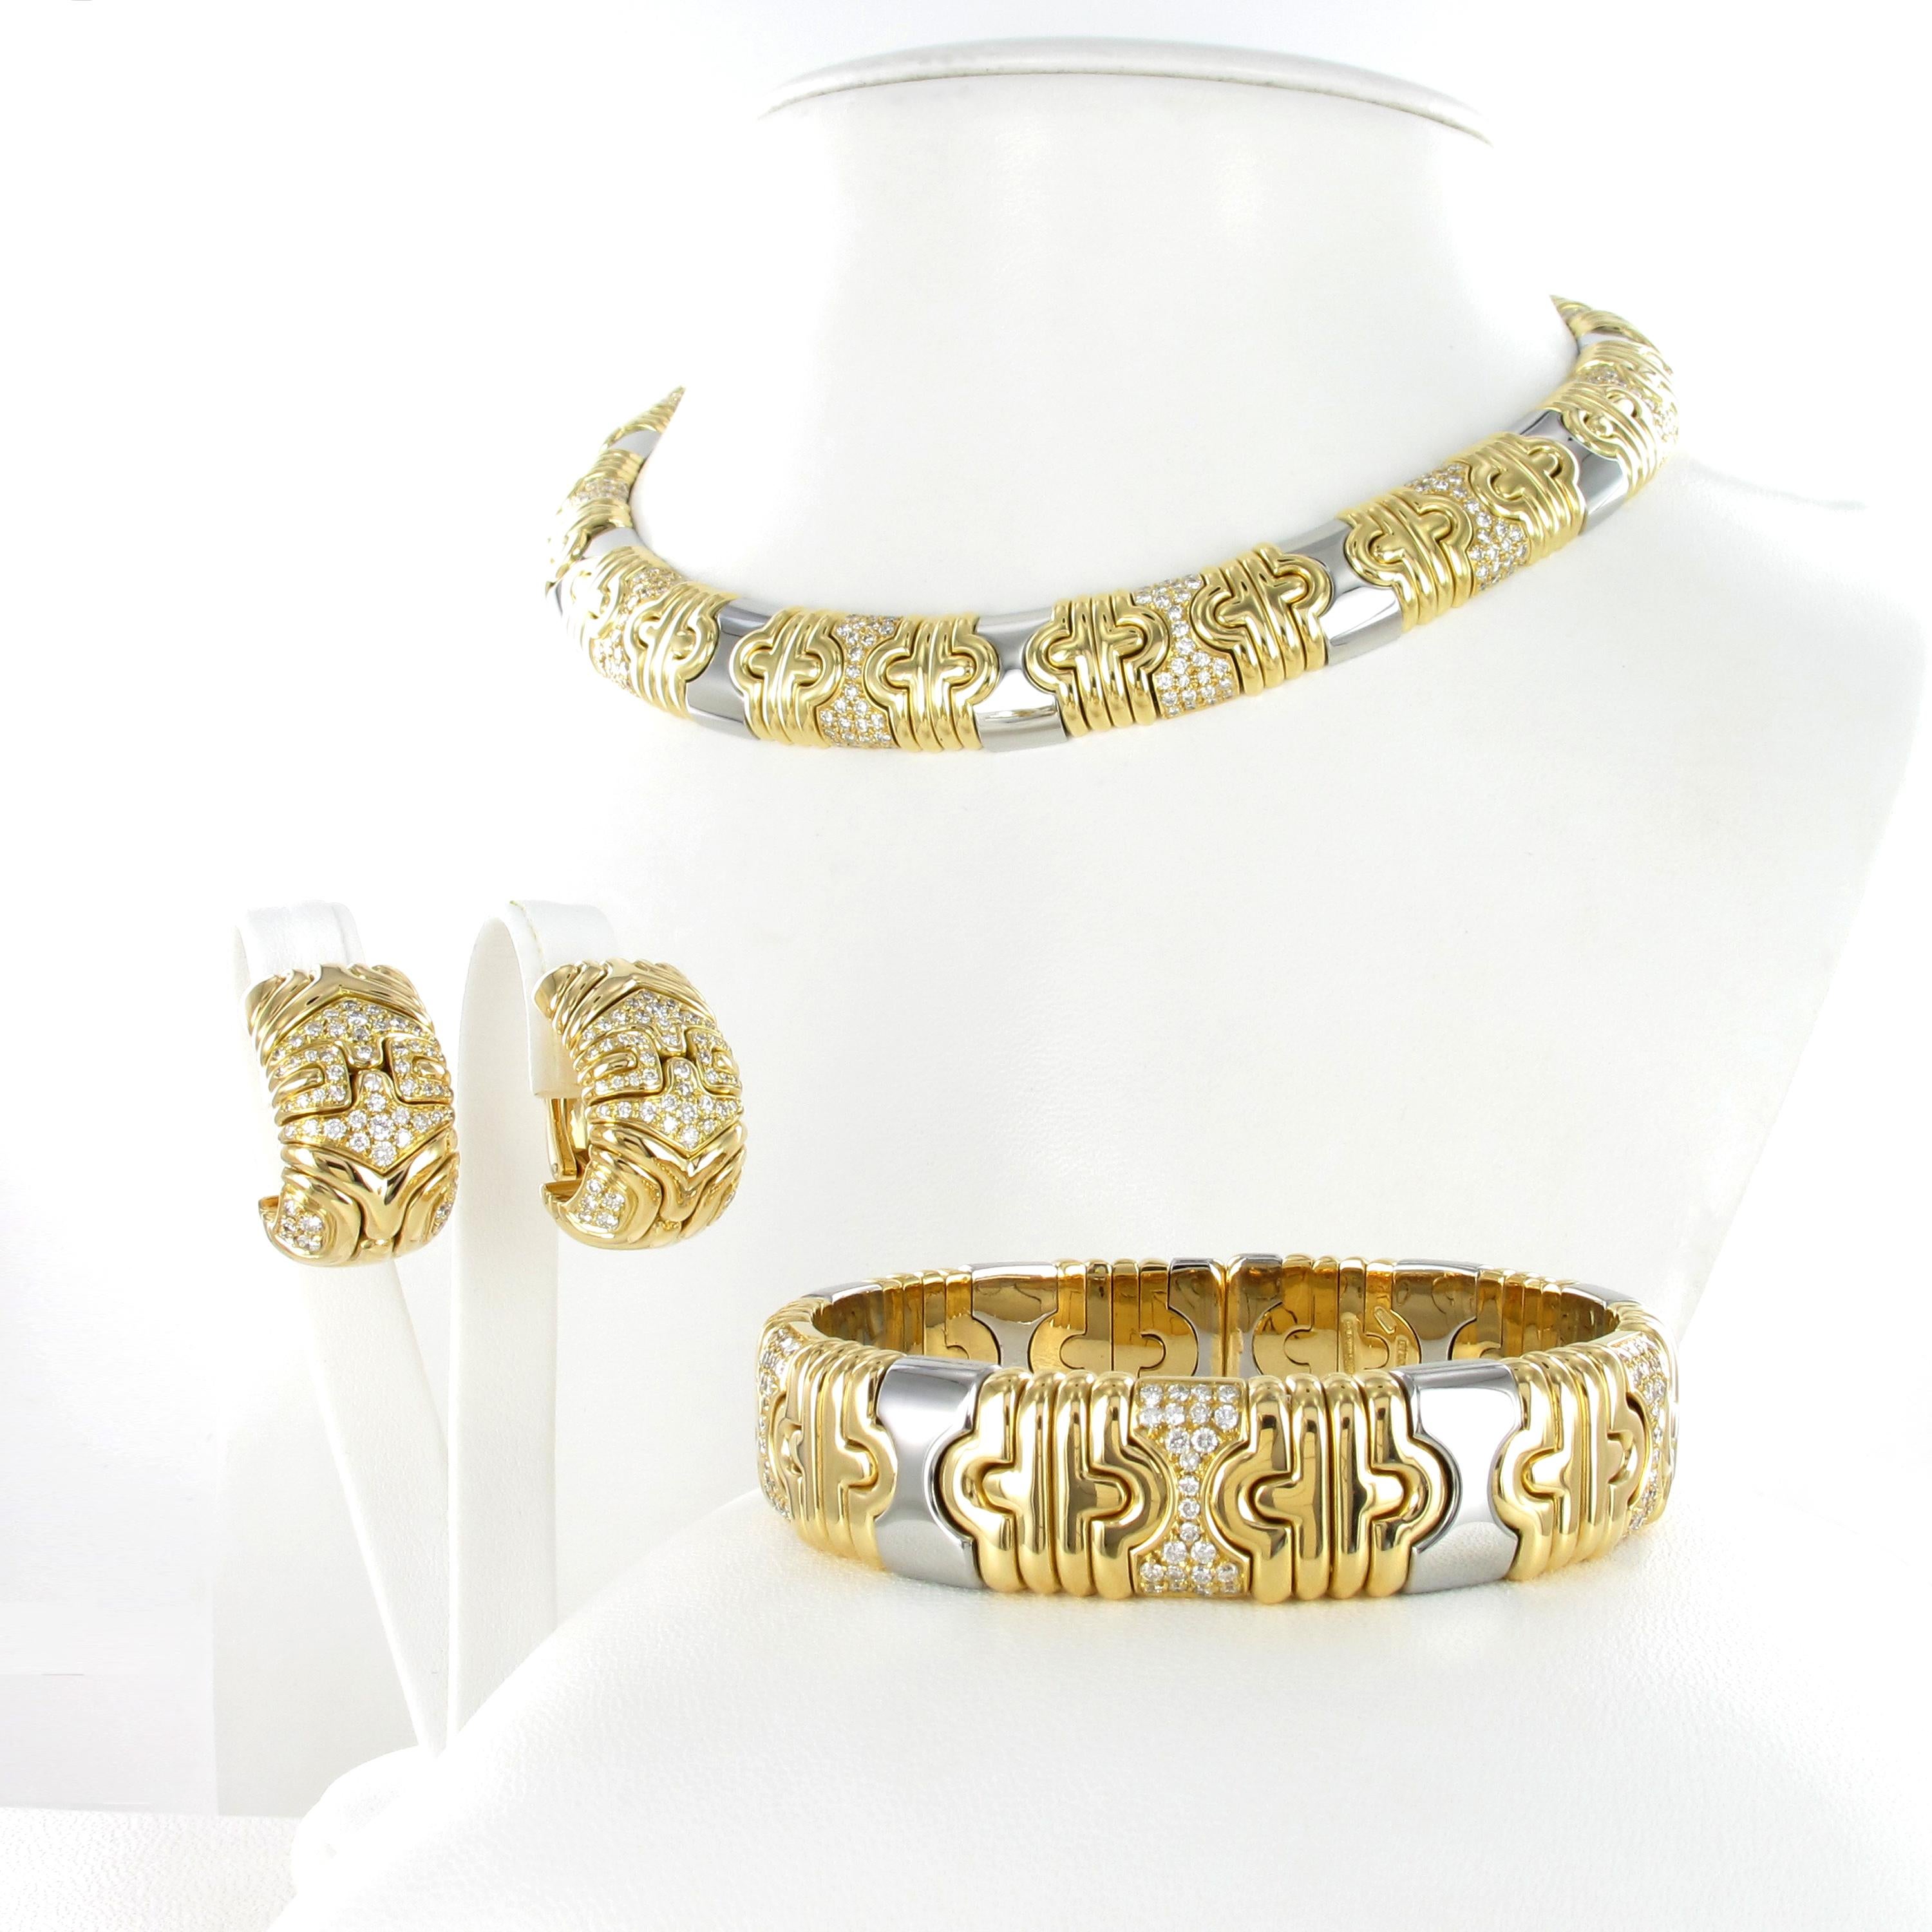 This beautiful set by the Italian jewellery icon Bulgari consists of three pieces, a necklace and bangle in 18 karat yellow gold and steel and a pair of ear clips in 18 karat yellow gold.

All three jewellery pieces are adorned with a carefully